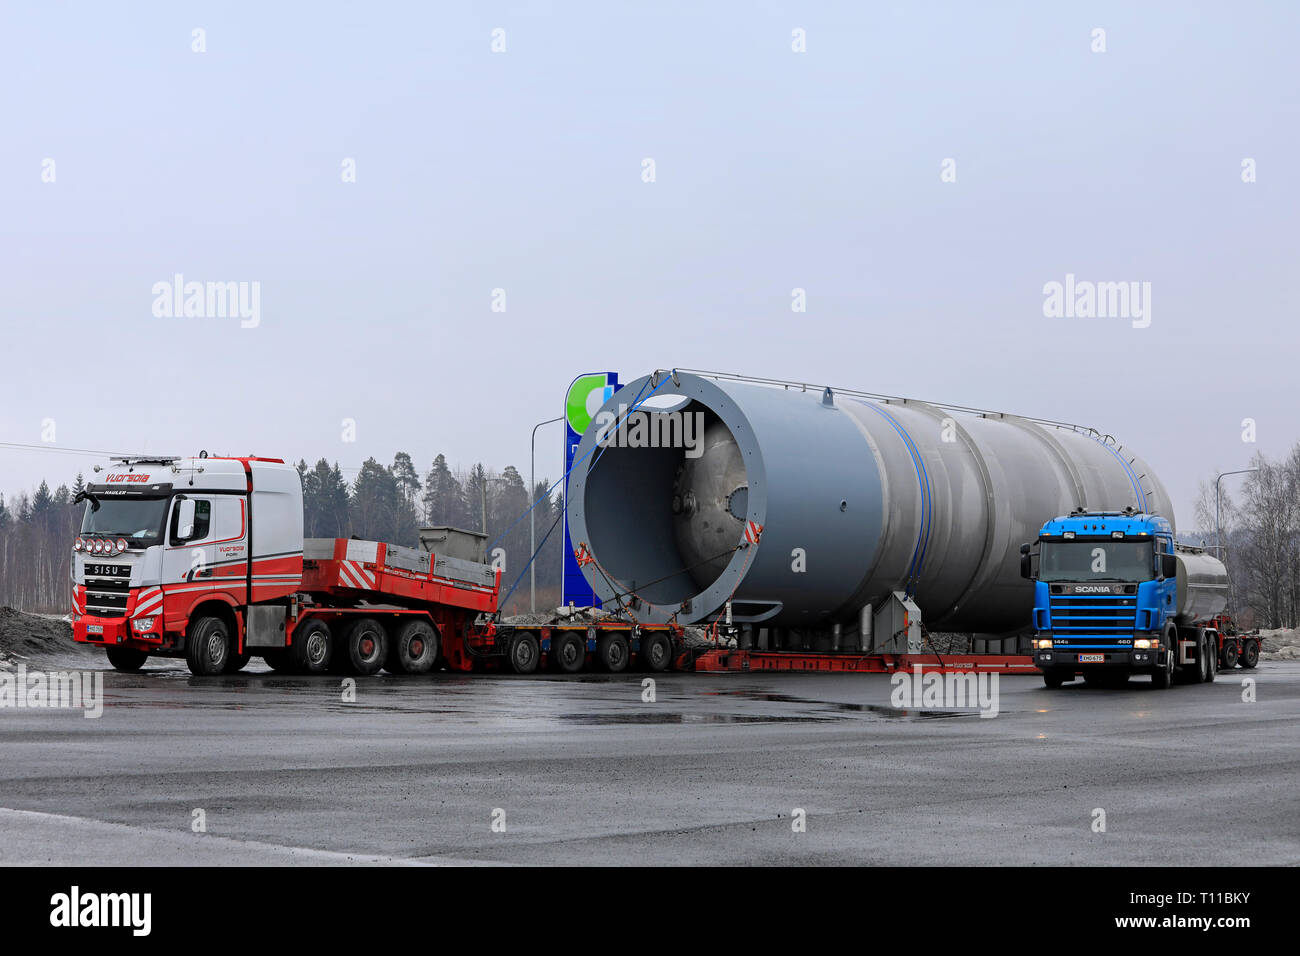 Forssa, Finland - March 16, 2019: Scania 144G tank truck looks small compared to Sisu Hauler and large silo exceptional load of 45 metres and 156 Ton. Stock Photo